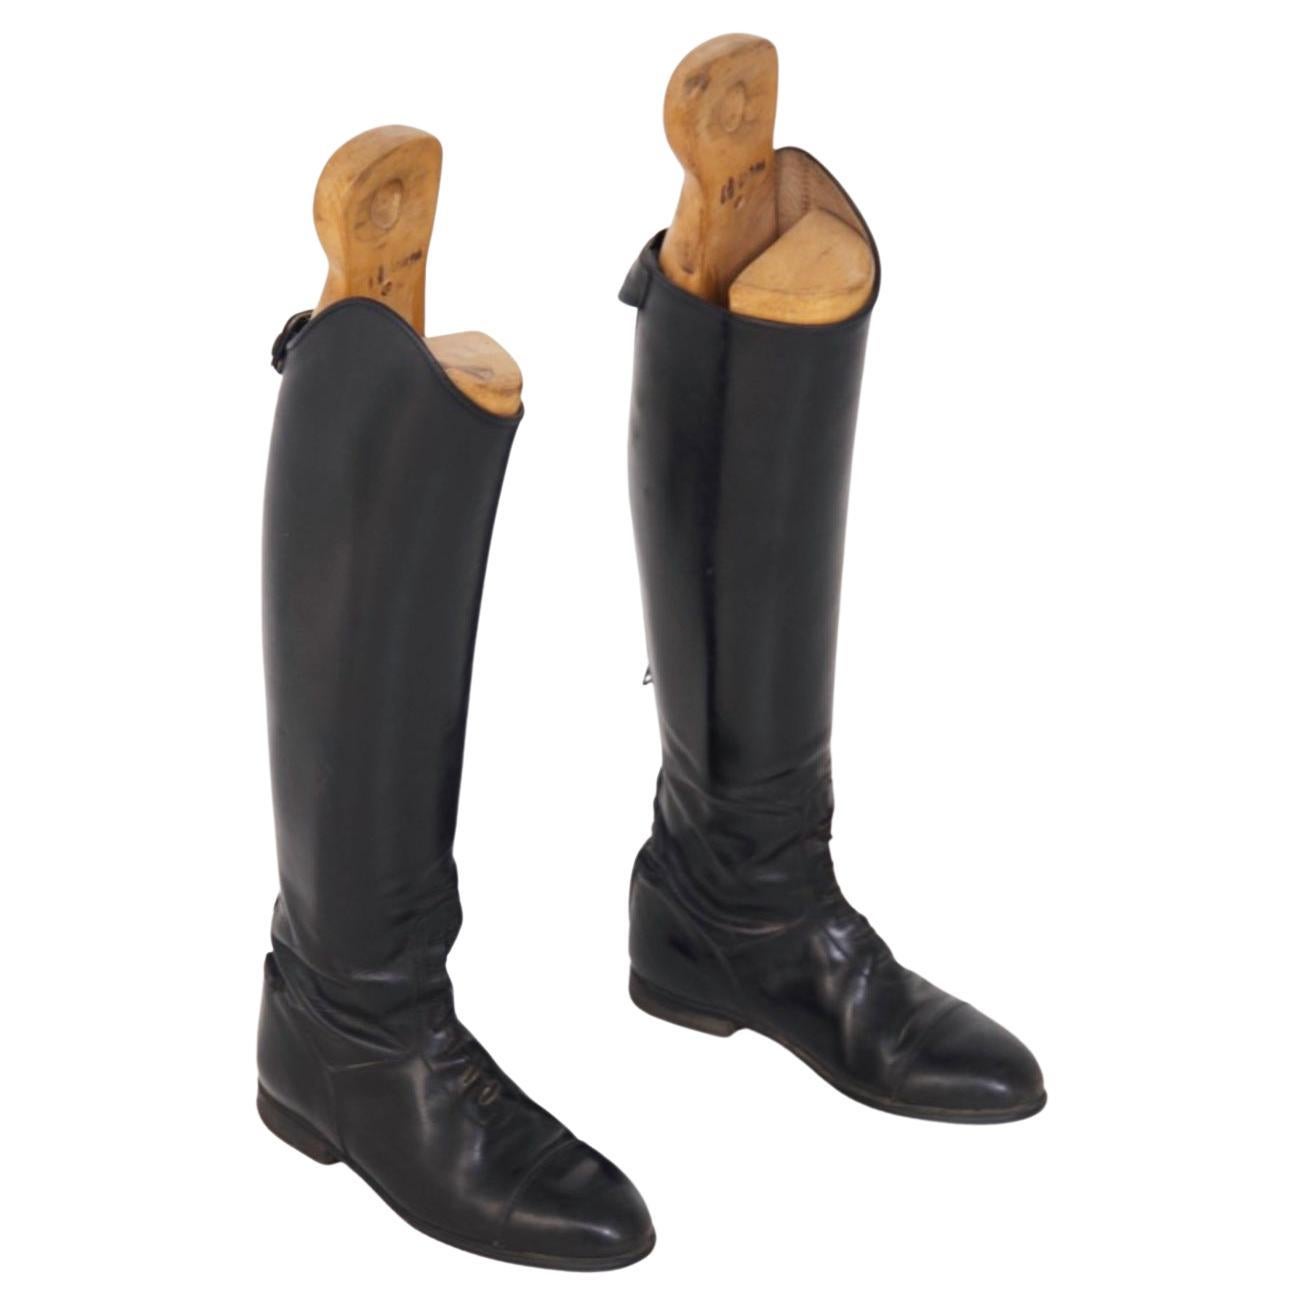 Vintage Leather Riding Boots